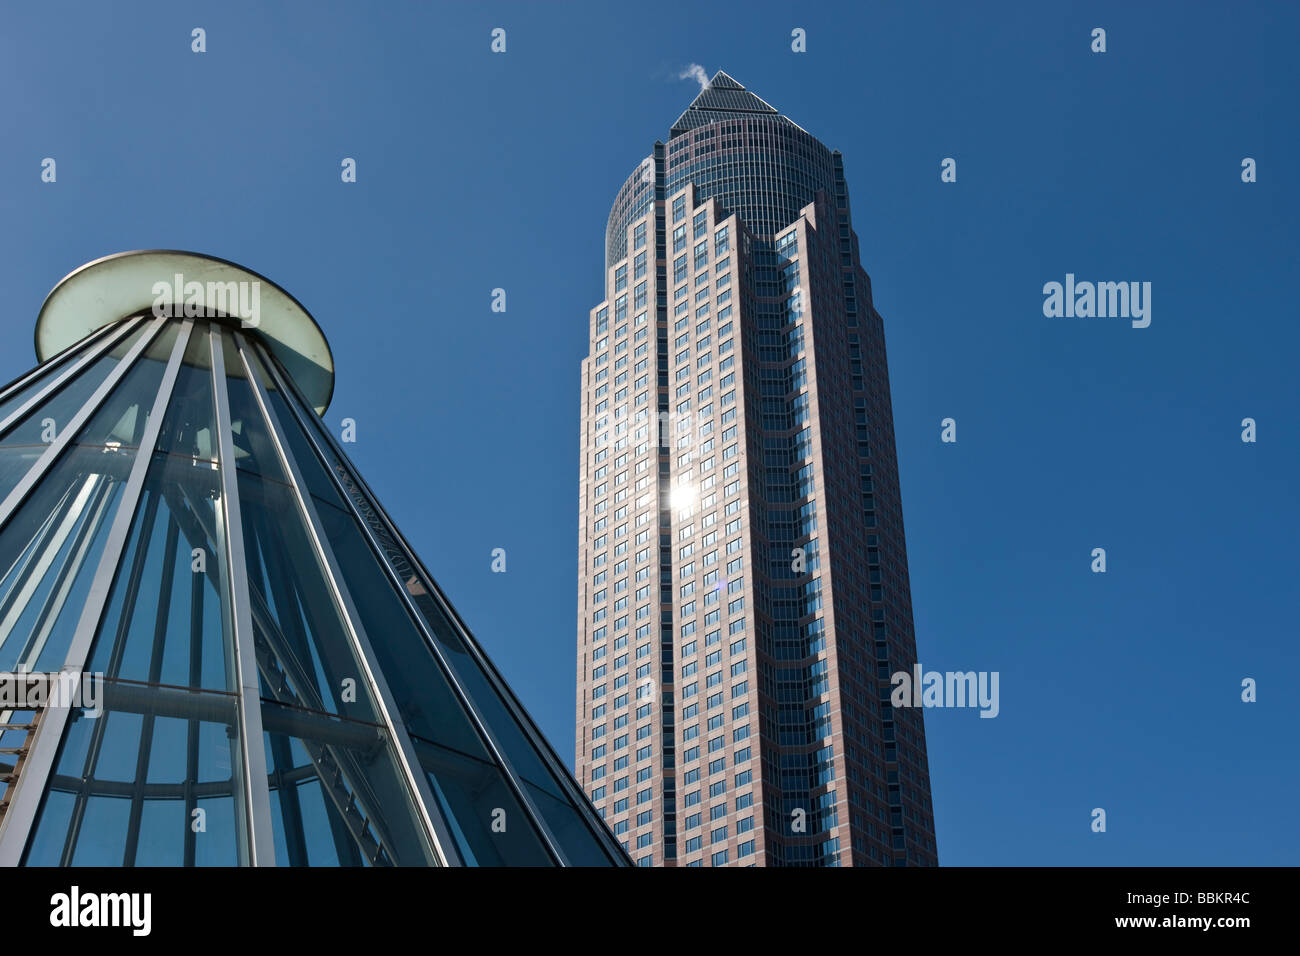 Entrance to the subway station in front of the Messeturm tower, Friedrich-Ebert-Anlage street, Frankfurt am Main, Hesse, German Stock Photo